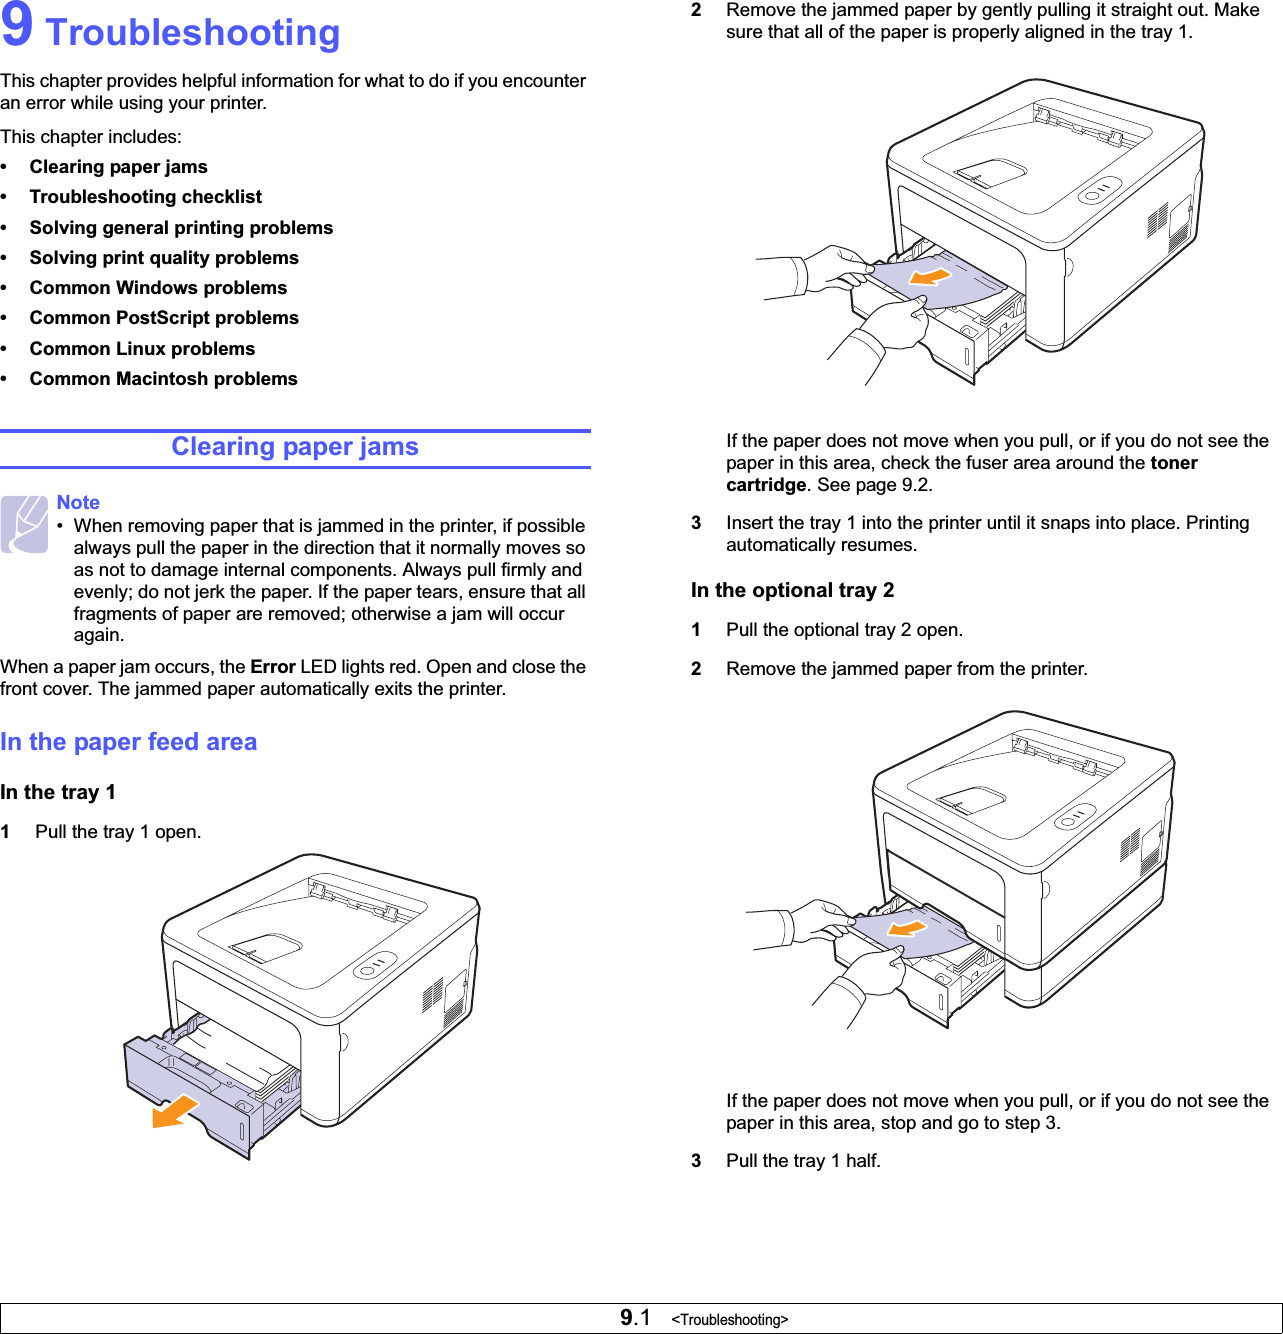 9.1   &lt;Troubleshooting&gt;9 TroubleshootingThis chapter provides helpful information for what to do if you encounter an error while using your printer. This chapter includes:• Clearing paper jams• Troubleshooting checklist• Solving general printing problems• Solving print quality problems• Common Windows problems• Common PostScript problems• Common Linux problems• Common Macintosh problemsClearing paper jamsWhen a paper jam occurs, the Error LED lights red. Open and close the front cover. The jammed paper automatically exits the printer. In the paper feed areaIn the tray 11Pull the tray 1 open.Note• When removing paper that is jammed in the printer, if possible always pull the paper in the direction that it normally moves so as not to damage internal components. Always pull firmly and evenly; do not jerk the paper. If the paper tears, ensure that all fragments of paper are removed; otherwise a jam will occur again.2Remove the jammed paper by gently pulling it straight out. Make sure that all of the paper is properly aligned in the tray 1.If the paper does not move when you pull, or if you do not see the paper in this area, check the fuser area around the tonercartridge. See page 9.2.3Insert the tray 1 into the printer until it snaps into place. Printing automatically resumes.In the optional tray 21Pull the optional tray 2 open.2Remove the jammed paper from the printer.If the paper does not move when you pull, or if you do not see the paper in this area, stop and go to step 3.3Pull the tray 1 half.